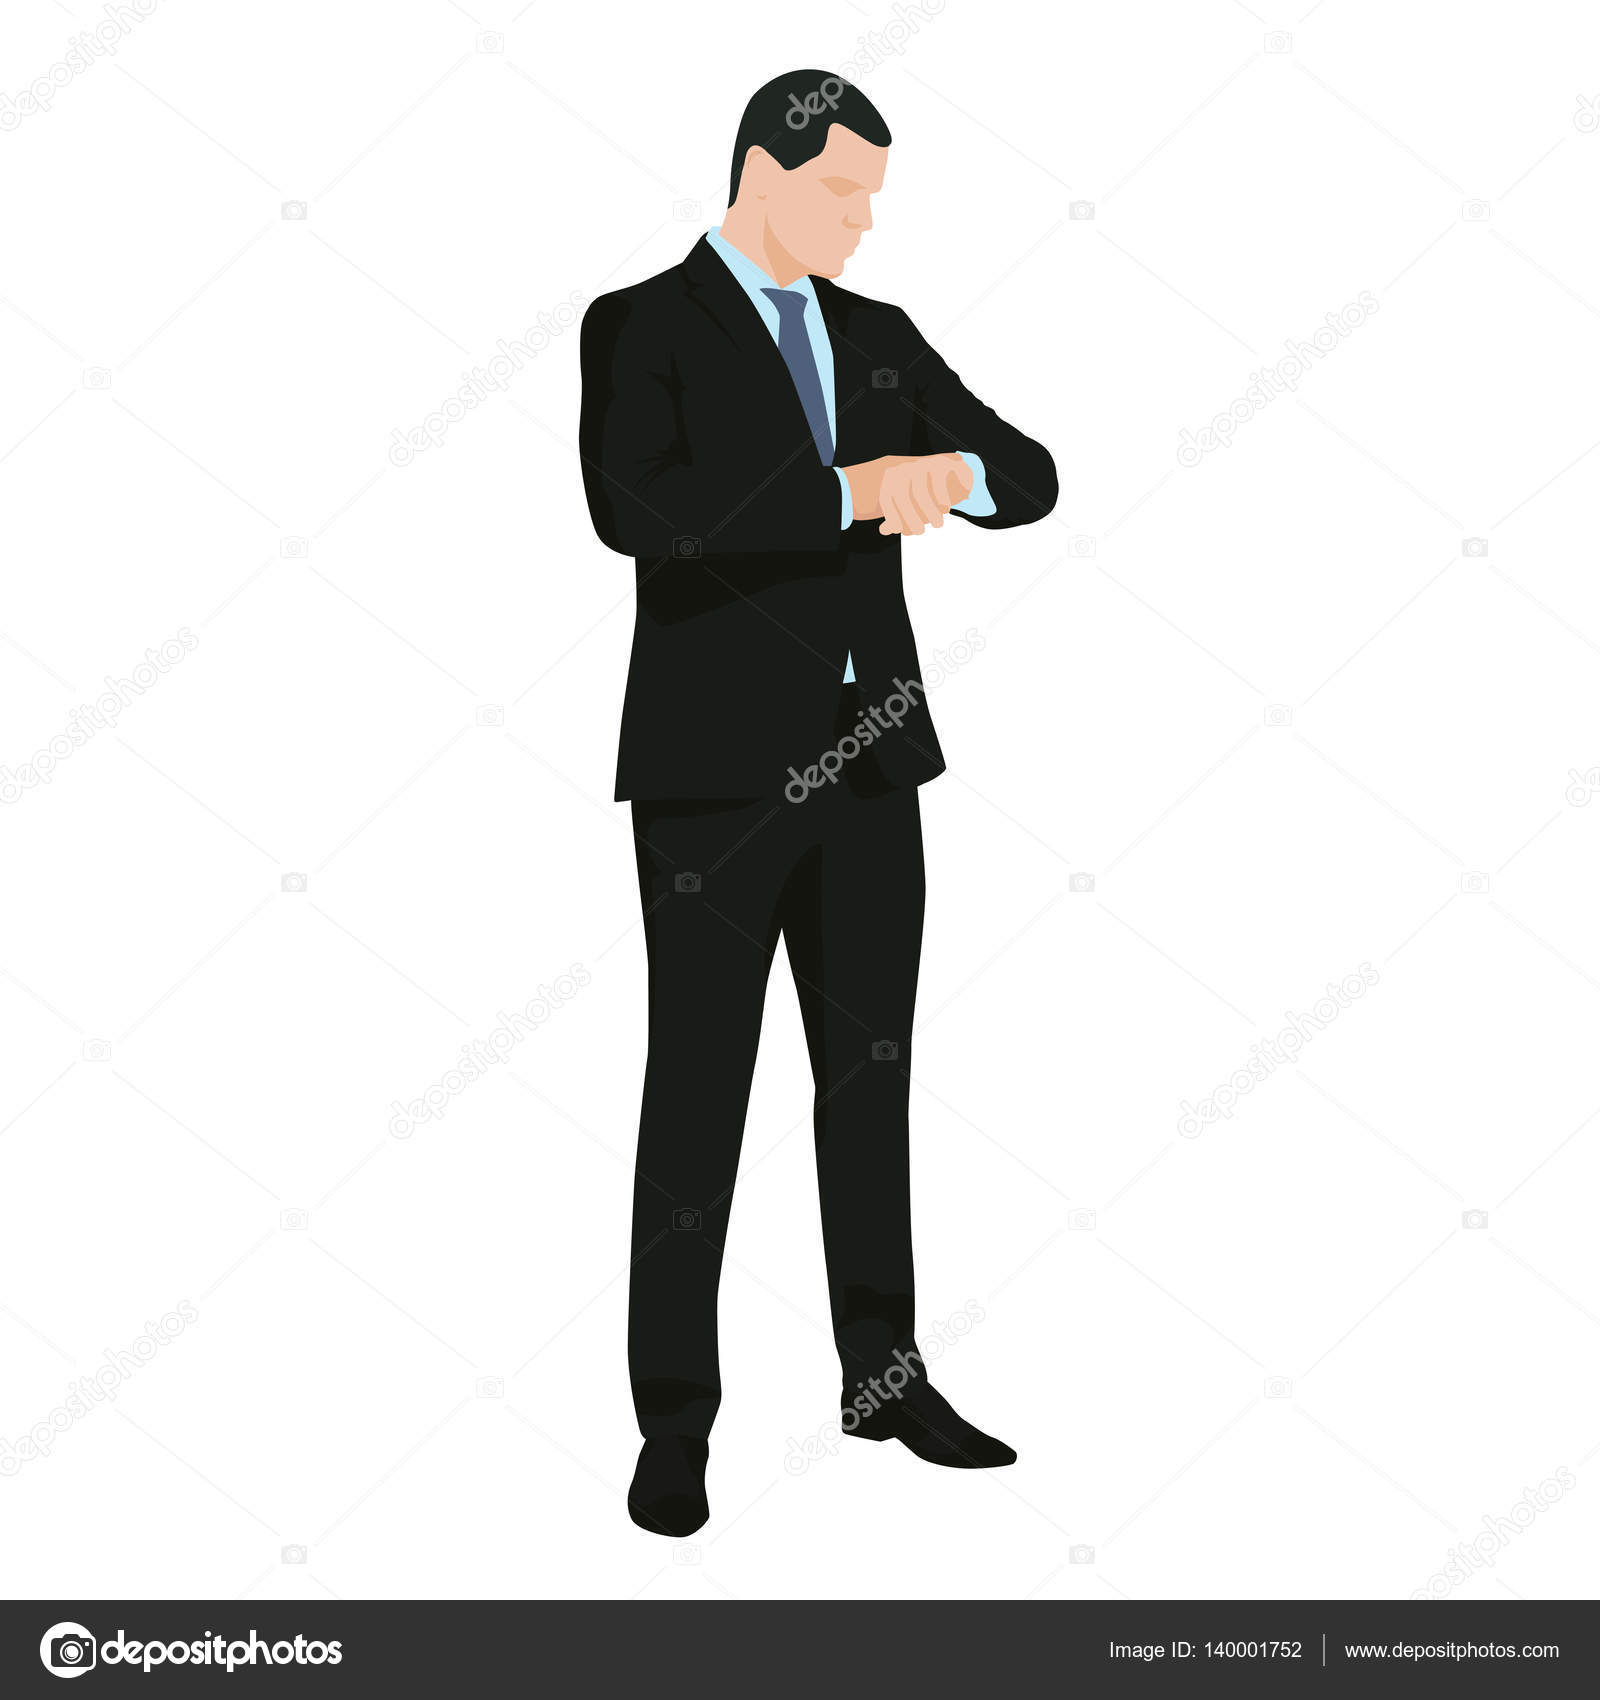 Business man in suit standing and checking his watch, flat desig ...